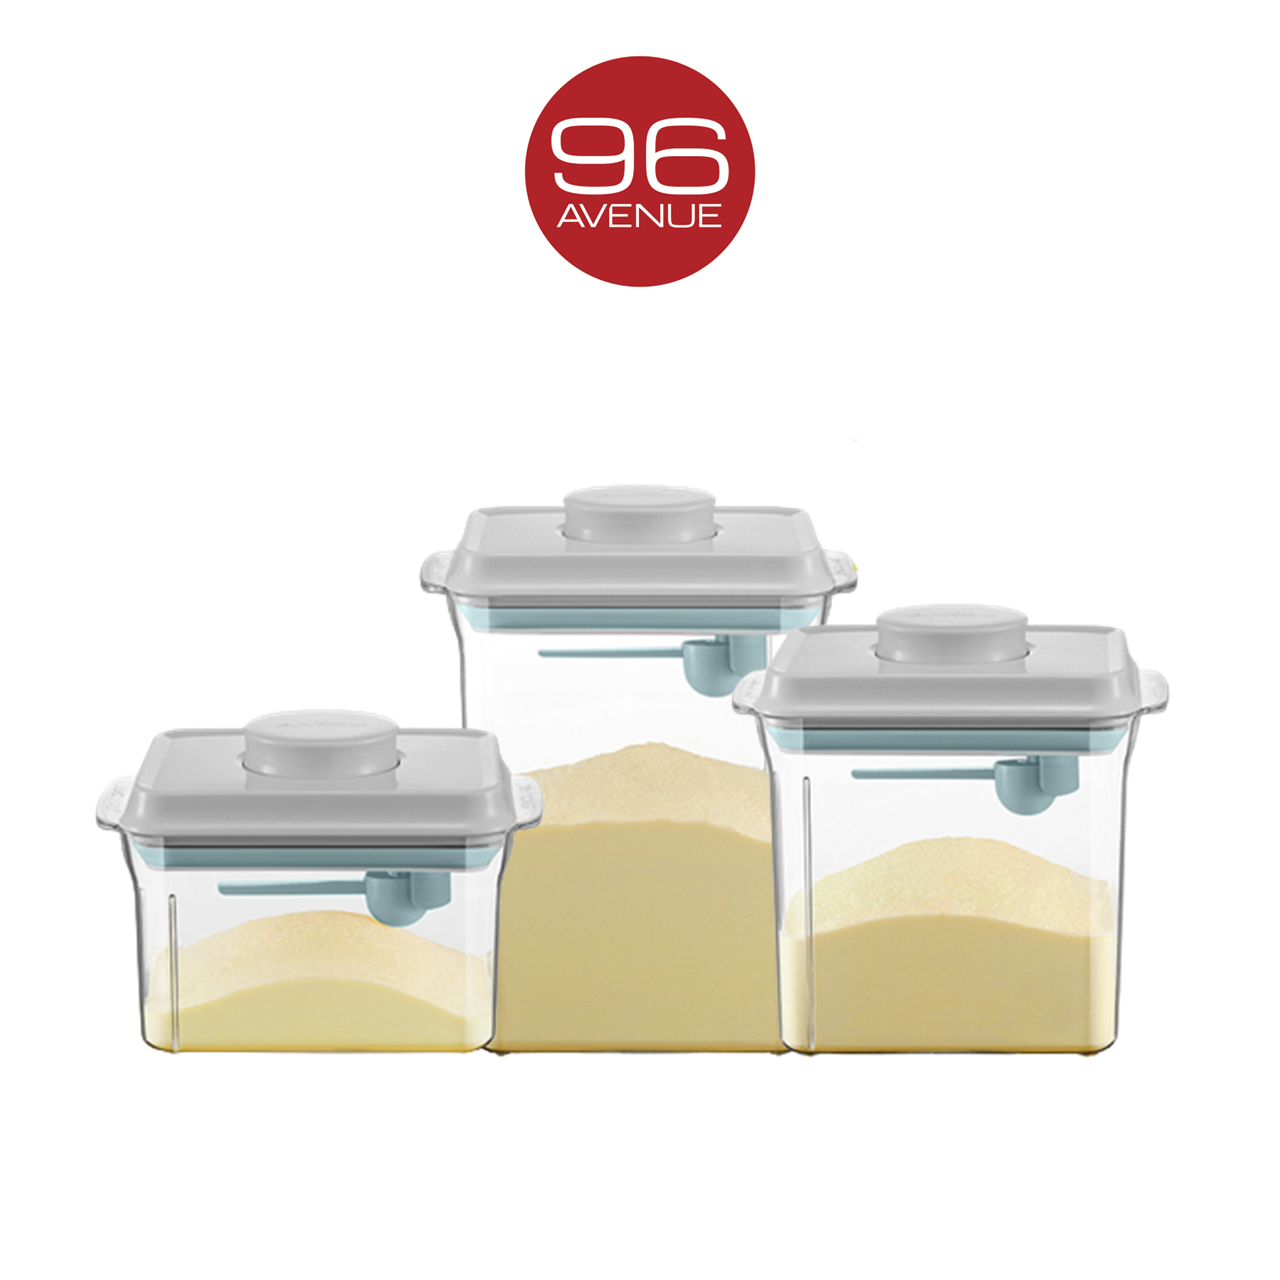 ANKOU AirTight Milk Powder Container with Scraper - Rectangle Clear 2300ml